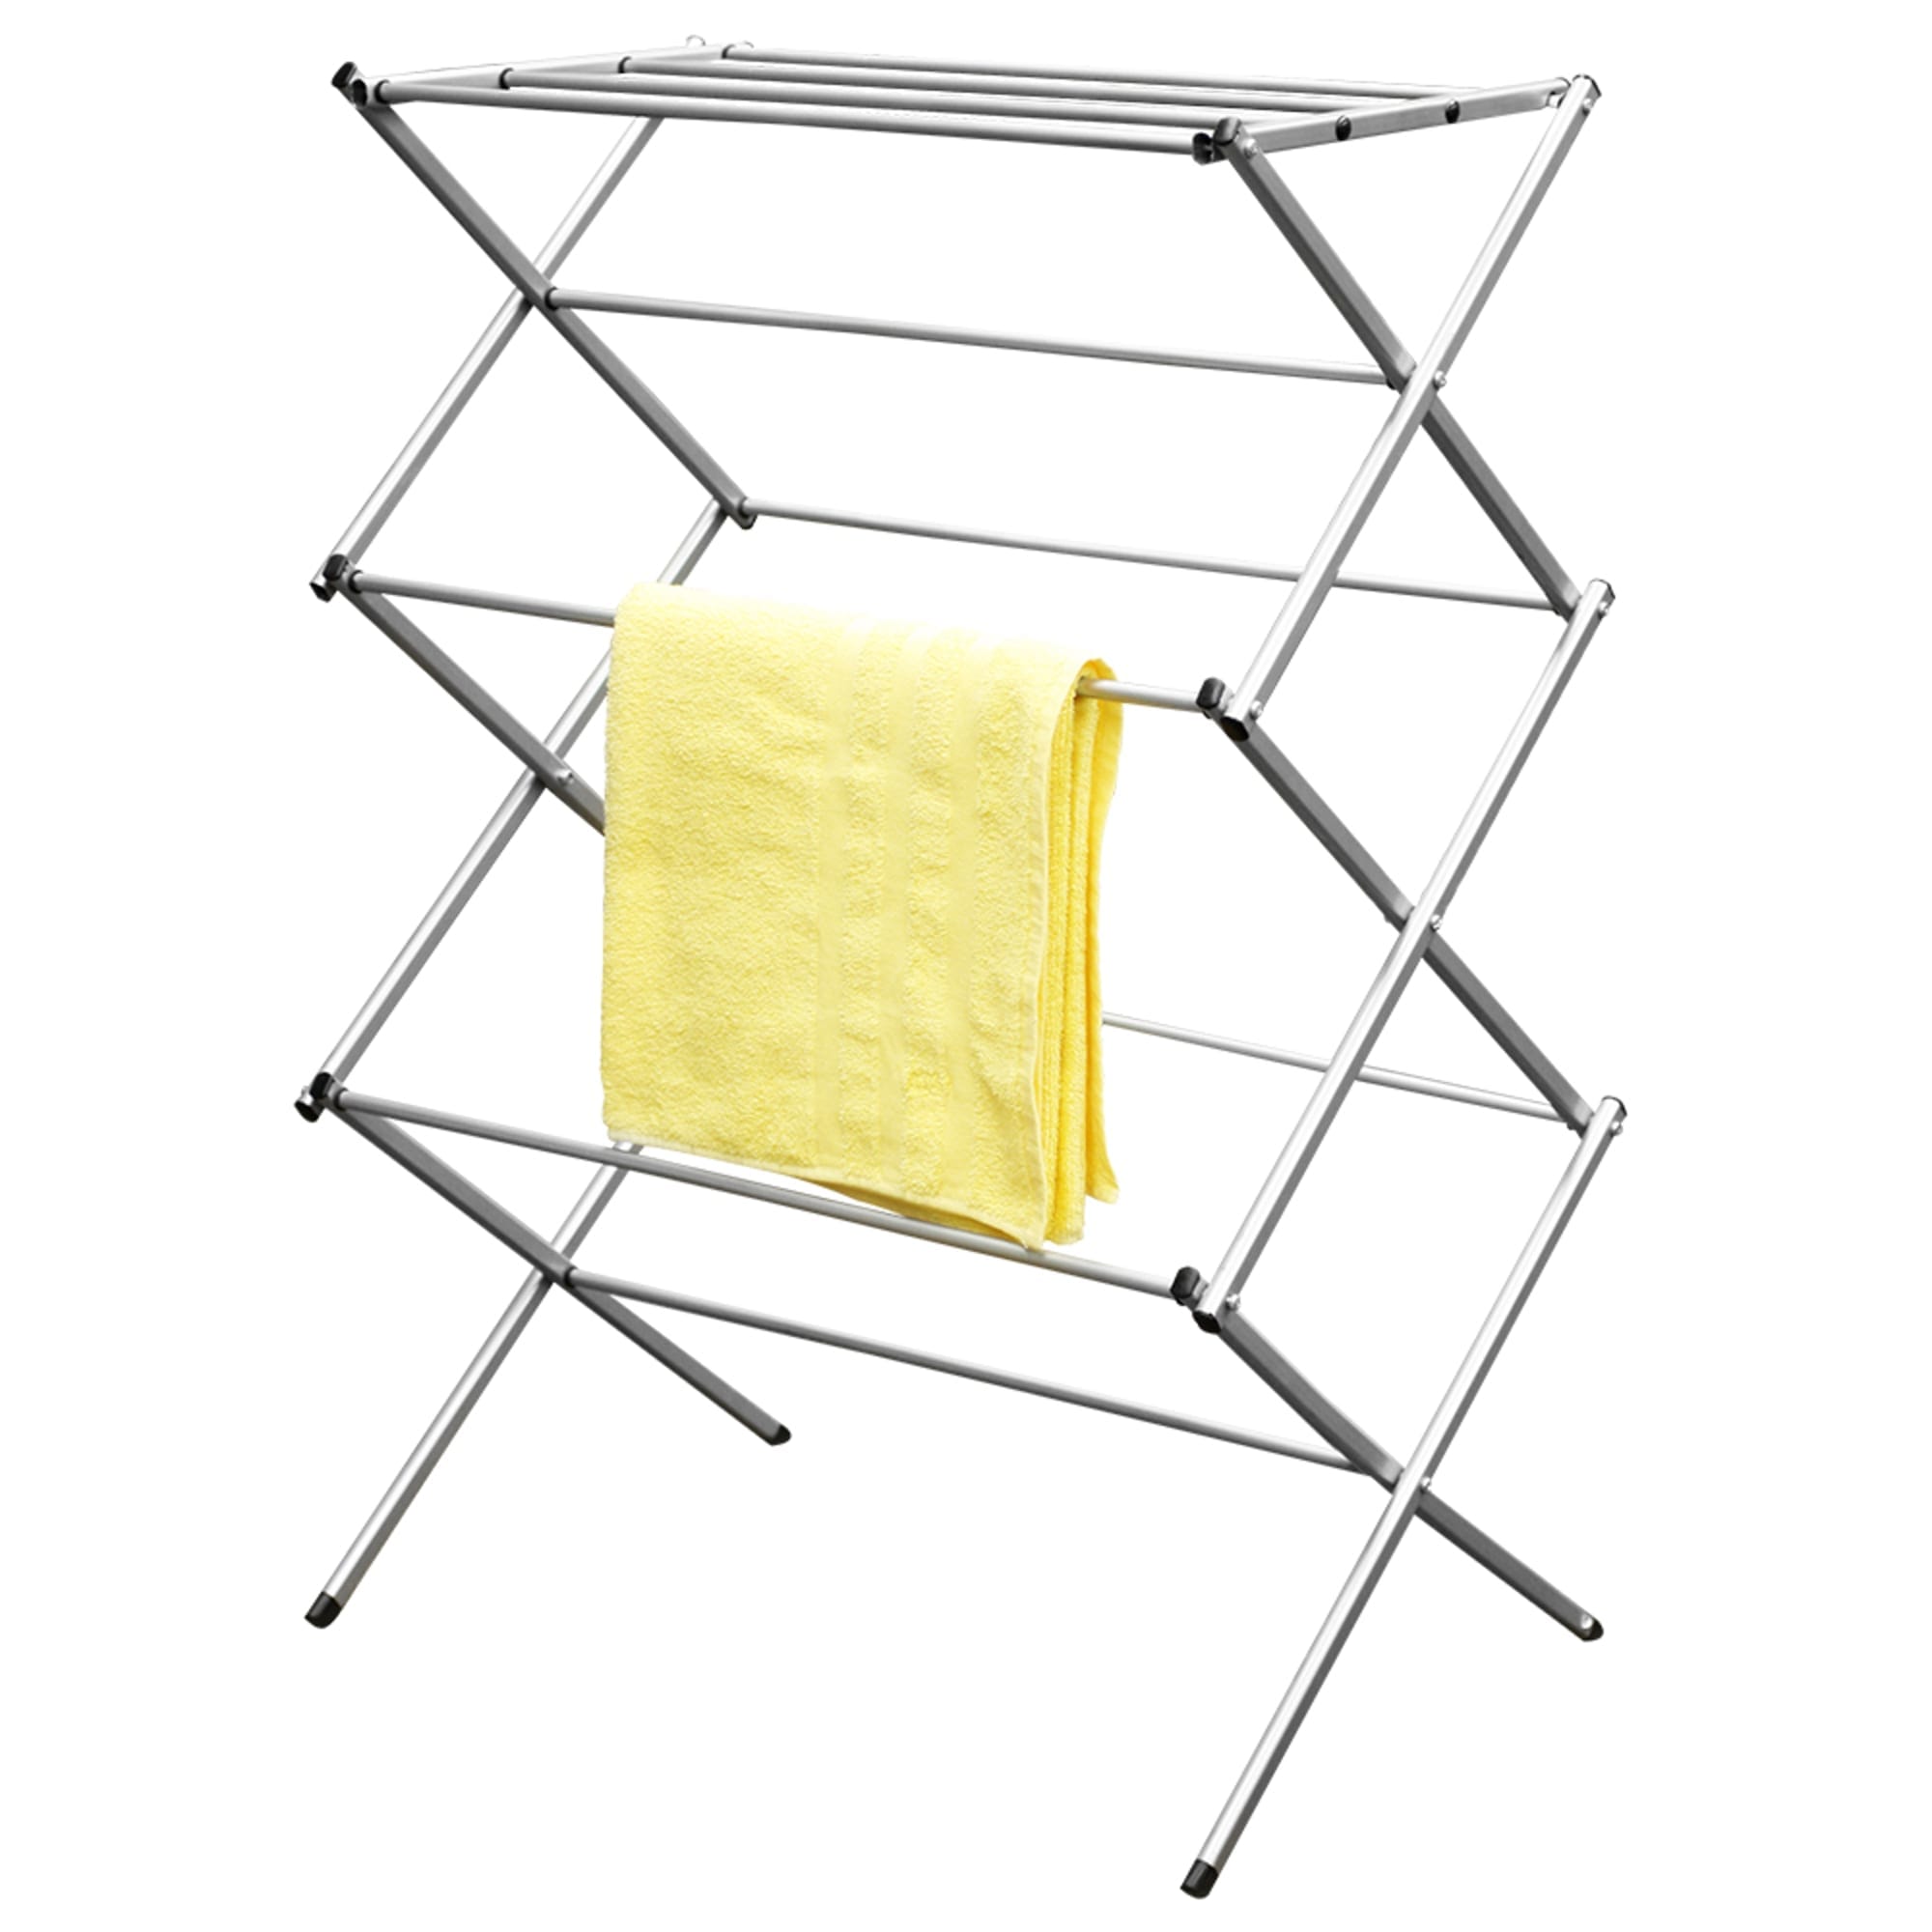 Home Basics 3-Tier Rust-Proof Enamel Coated Steel Collapsible Clothes Drying Rack, Grey $15.00 EACH, CASE PACK OF 4